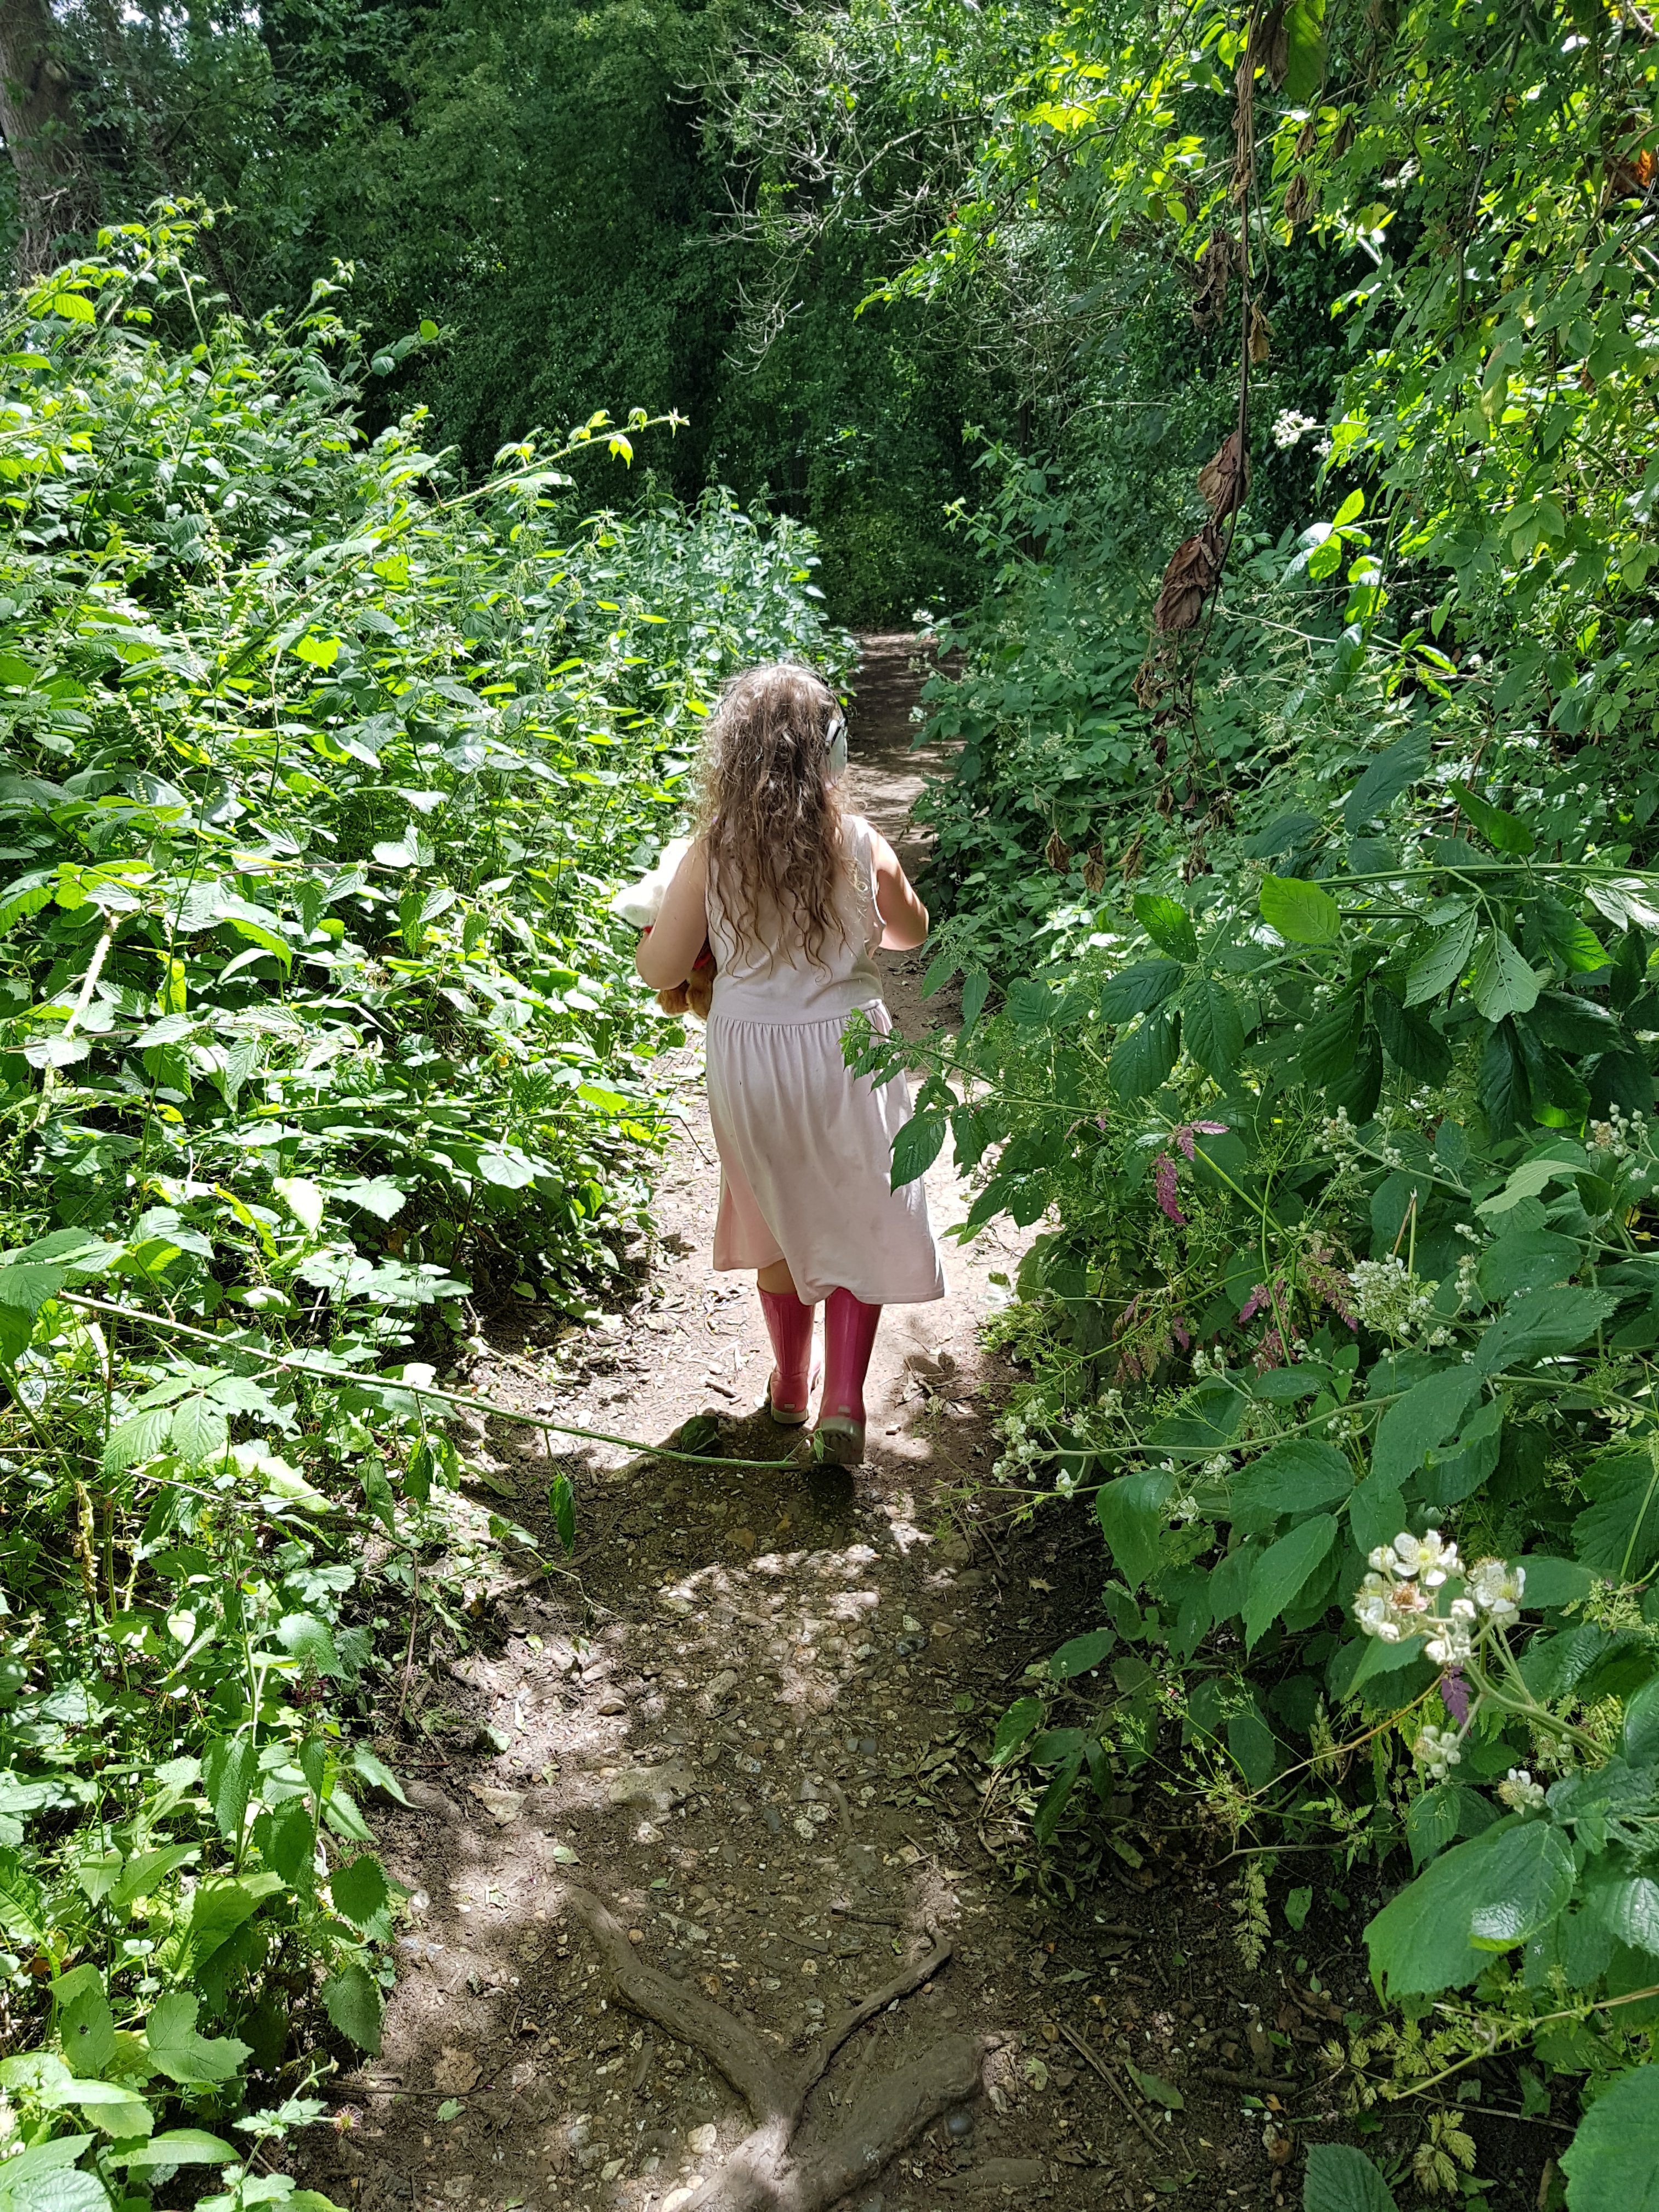 30 days wild, #30dayswild, #livinglifewild, The Wildlife Trusts, stay wild, nature, wildlife, natural environment, childhood unplugged, get outside, outdoors, Wick, nature reserve, ancient woodland